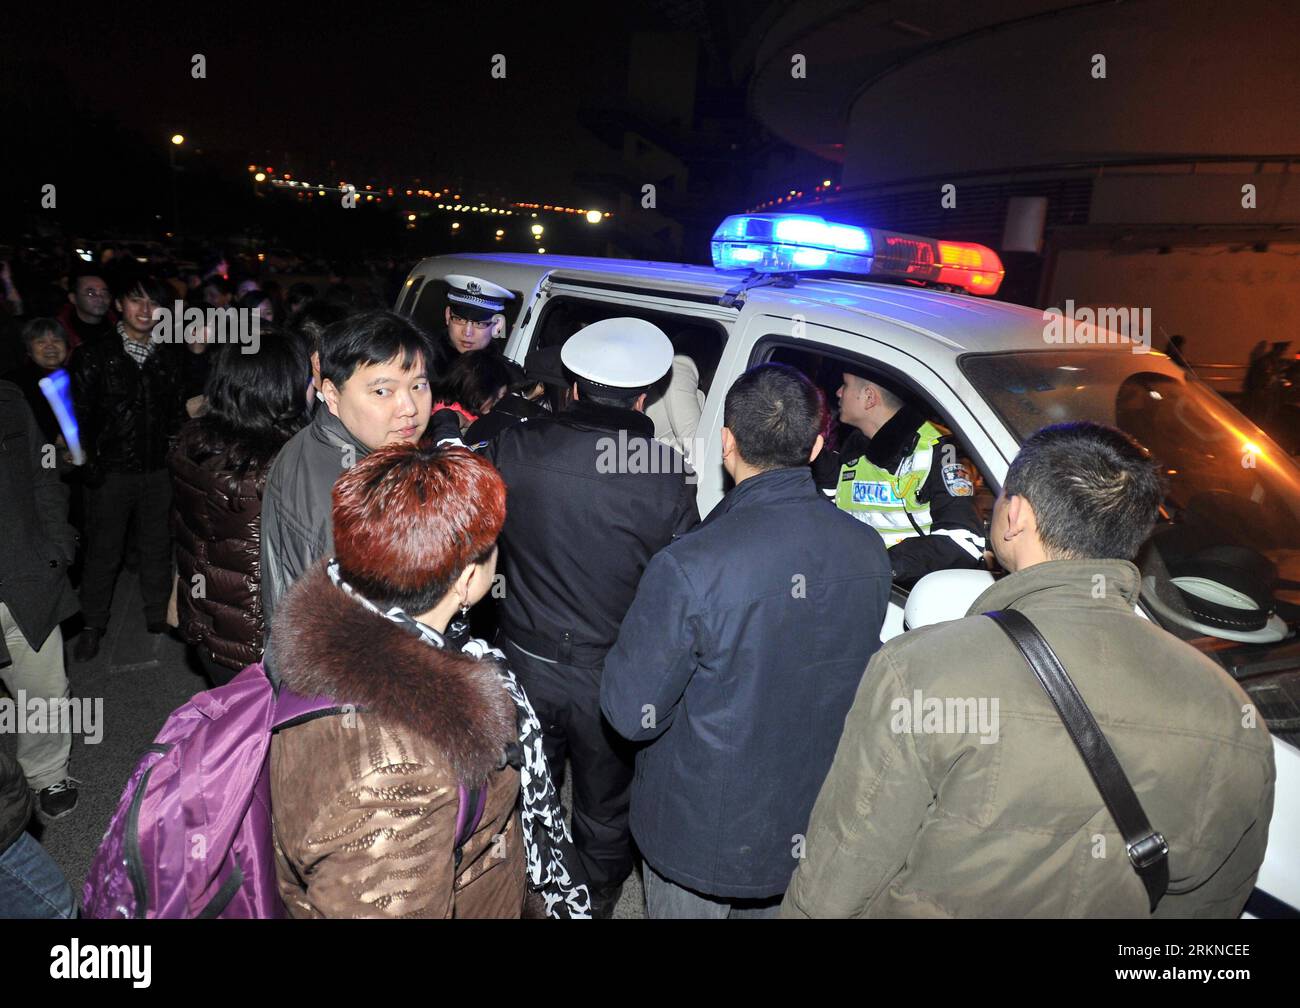 Bildnummer: 57084826  Datum: 17.02.2012  Copyright: imago/Xinhua (120217) -- CHONGQING, Feb. 17, 2012 (Xinhua) -- Policemen send injured audiences to hospital in Chongqing, southwest China, Feb. 17, 2012. The E1 and F1 auditorium of Faye Wong s concert collapsed at about 8:10 p.m. before the show begins on Friday and the concert was cancelled. (Xinhua) (zkr) CHINA-CHONGQING-FAYE WONG-CONCERT-COLLAPSE(CN) PUBLICATIONxNOTxINxCHN Gesellschaft Unglück Unfall Einsturz Stadion Stadioneinsturz premiumd xns x0x 2012 quer      57084826 Date 17 02 2012 Copyright Imago XINHUA  Chongqing Feb 17 2012 XINHU Stock Photo